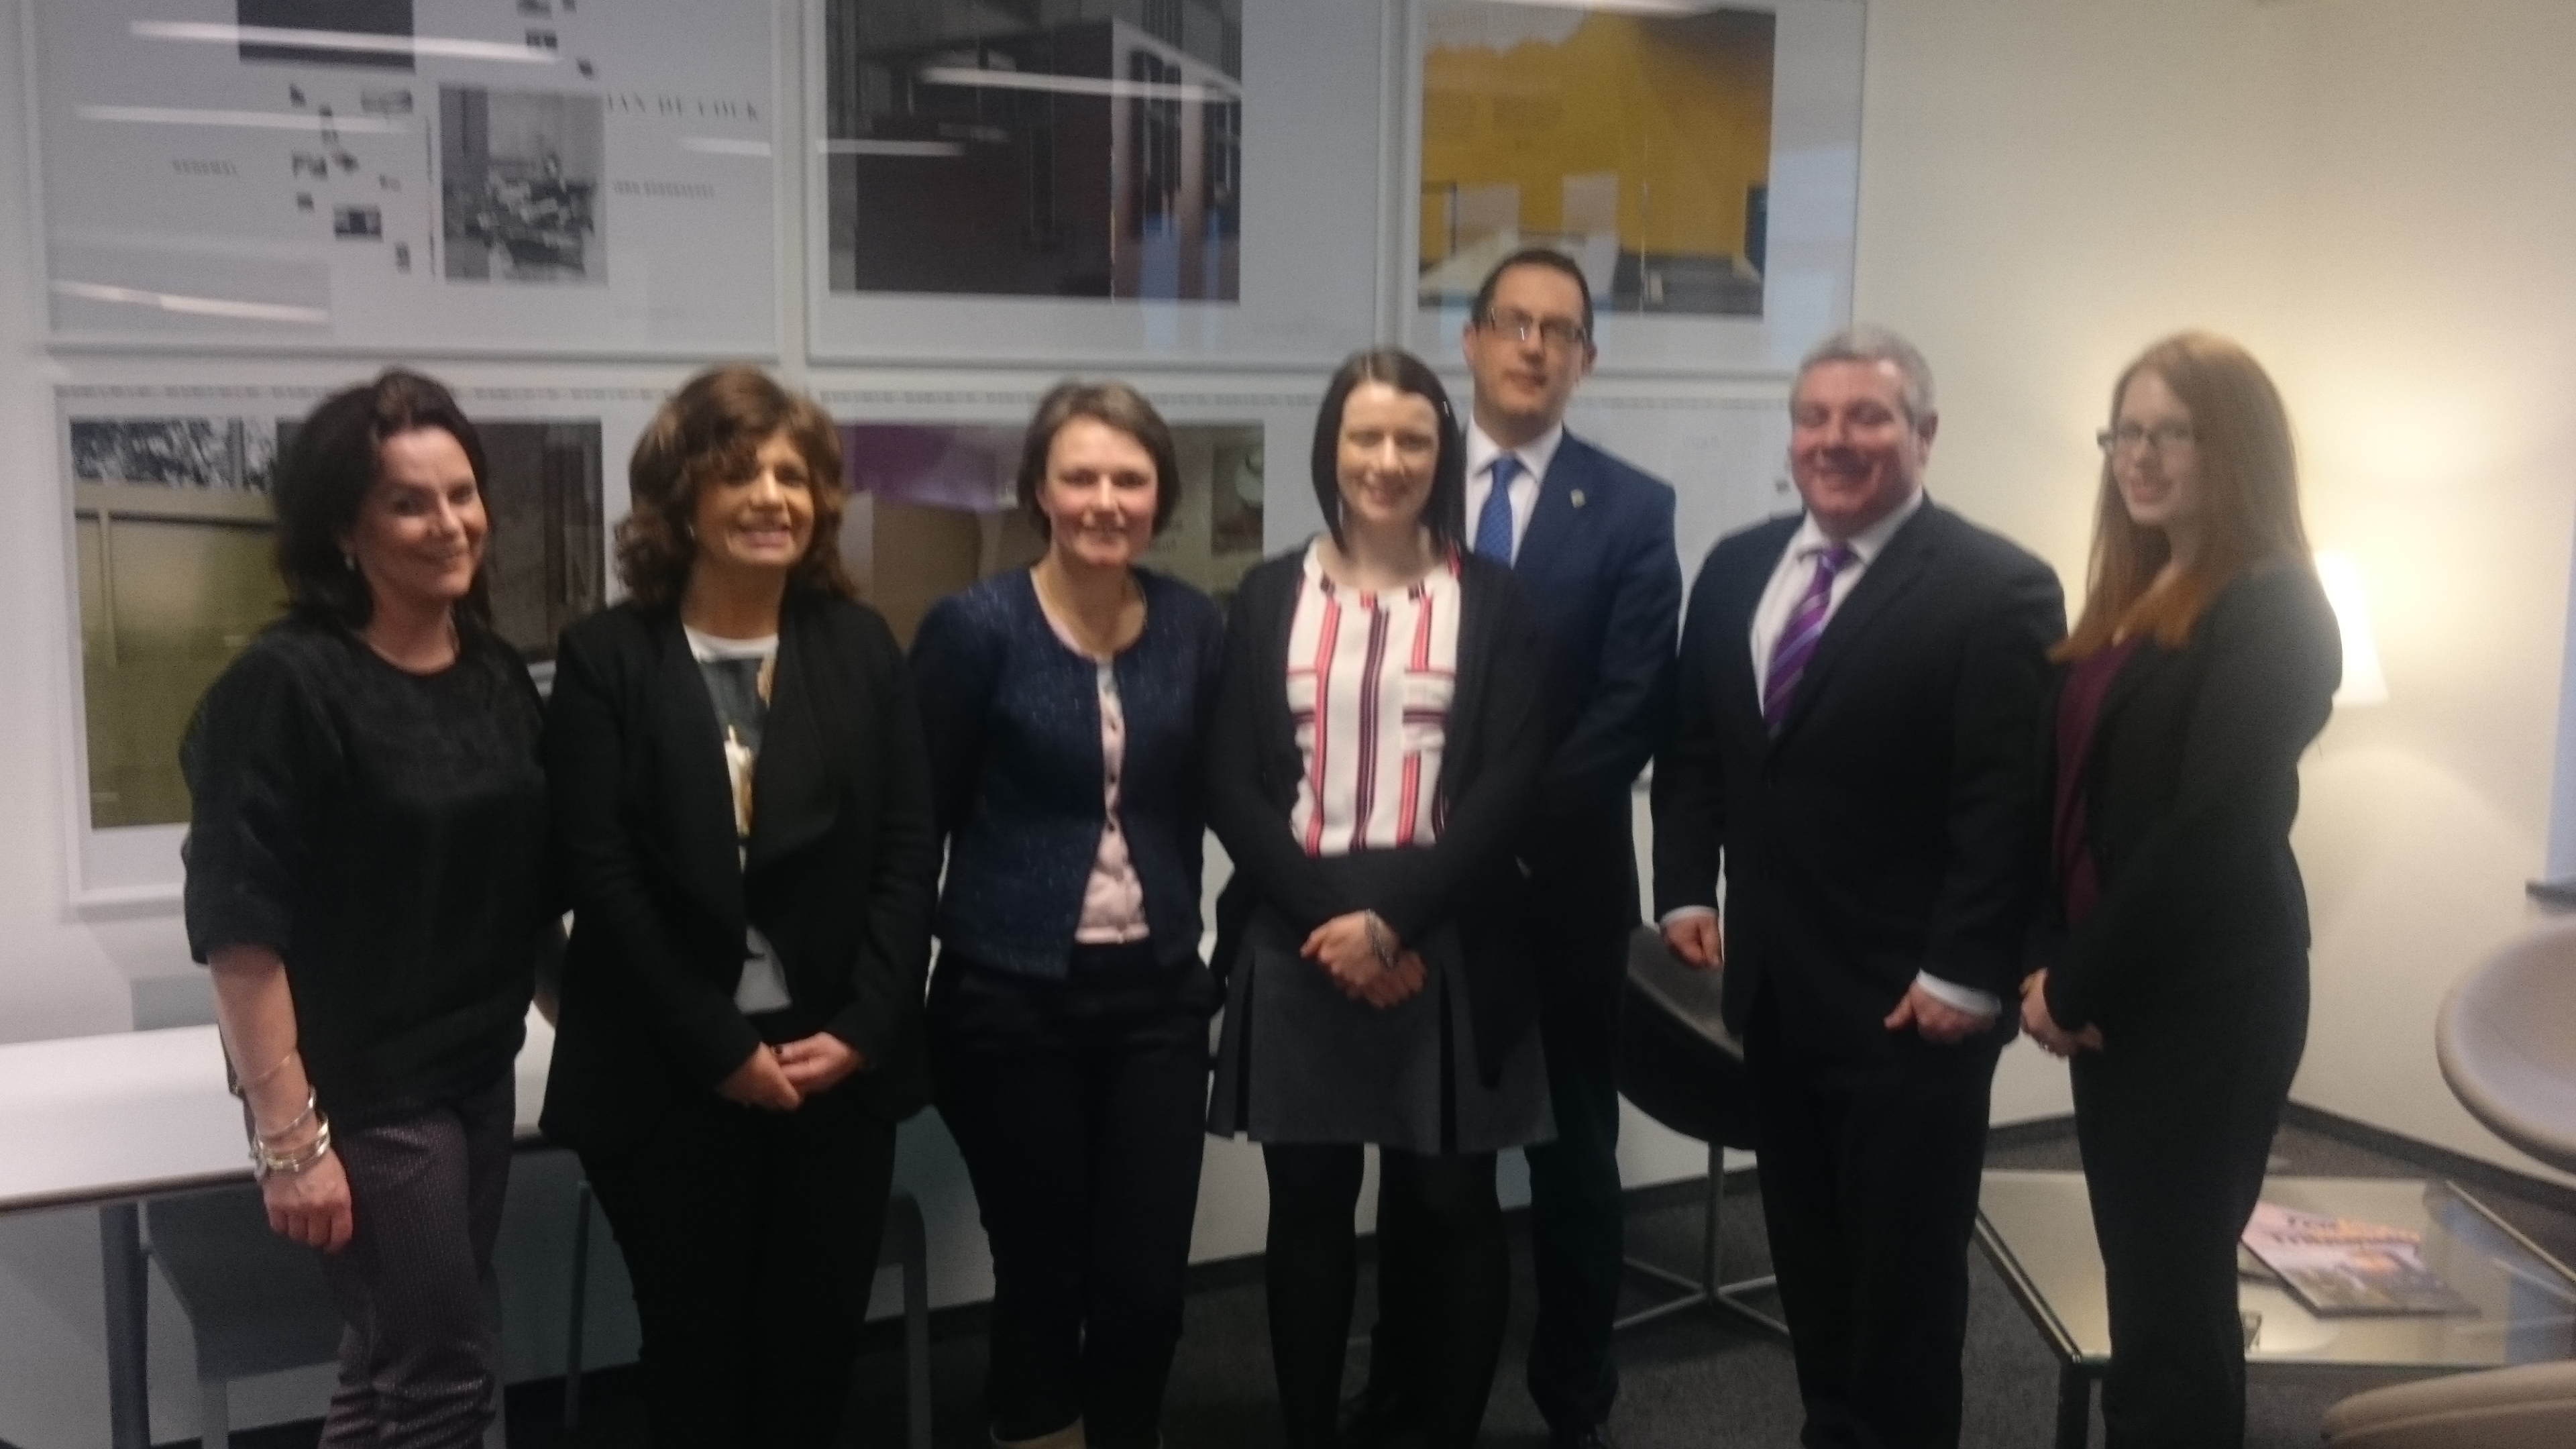 Cork Chamber of Commerce’s delegation to Brussels on Innovation and Entrepreneur